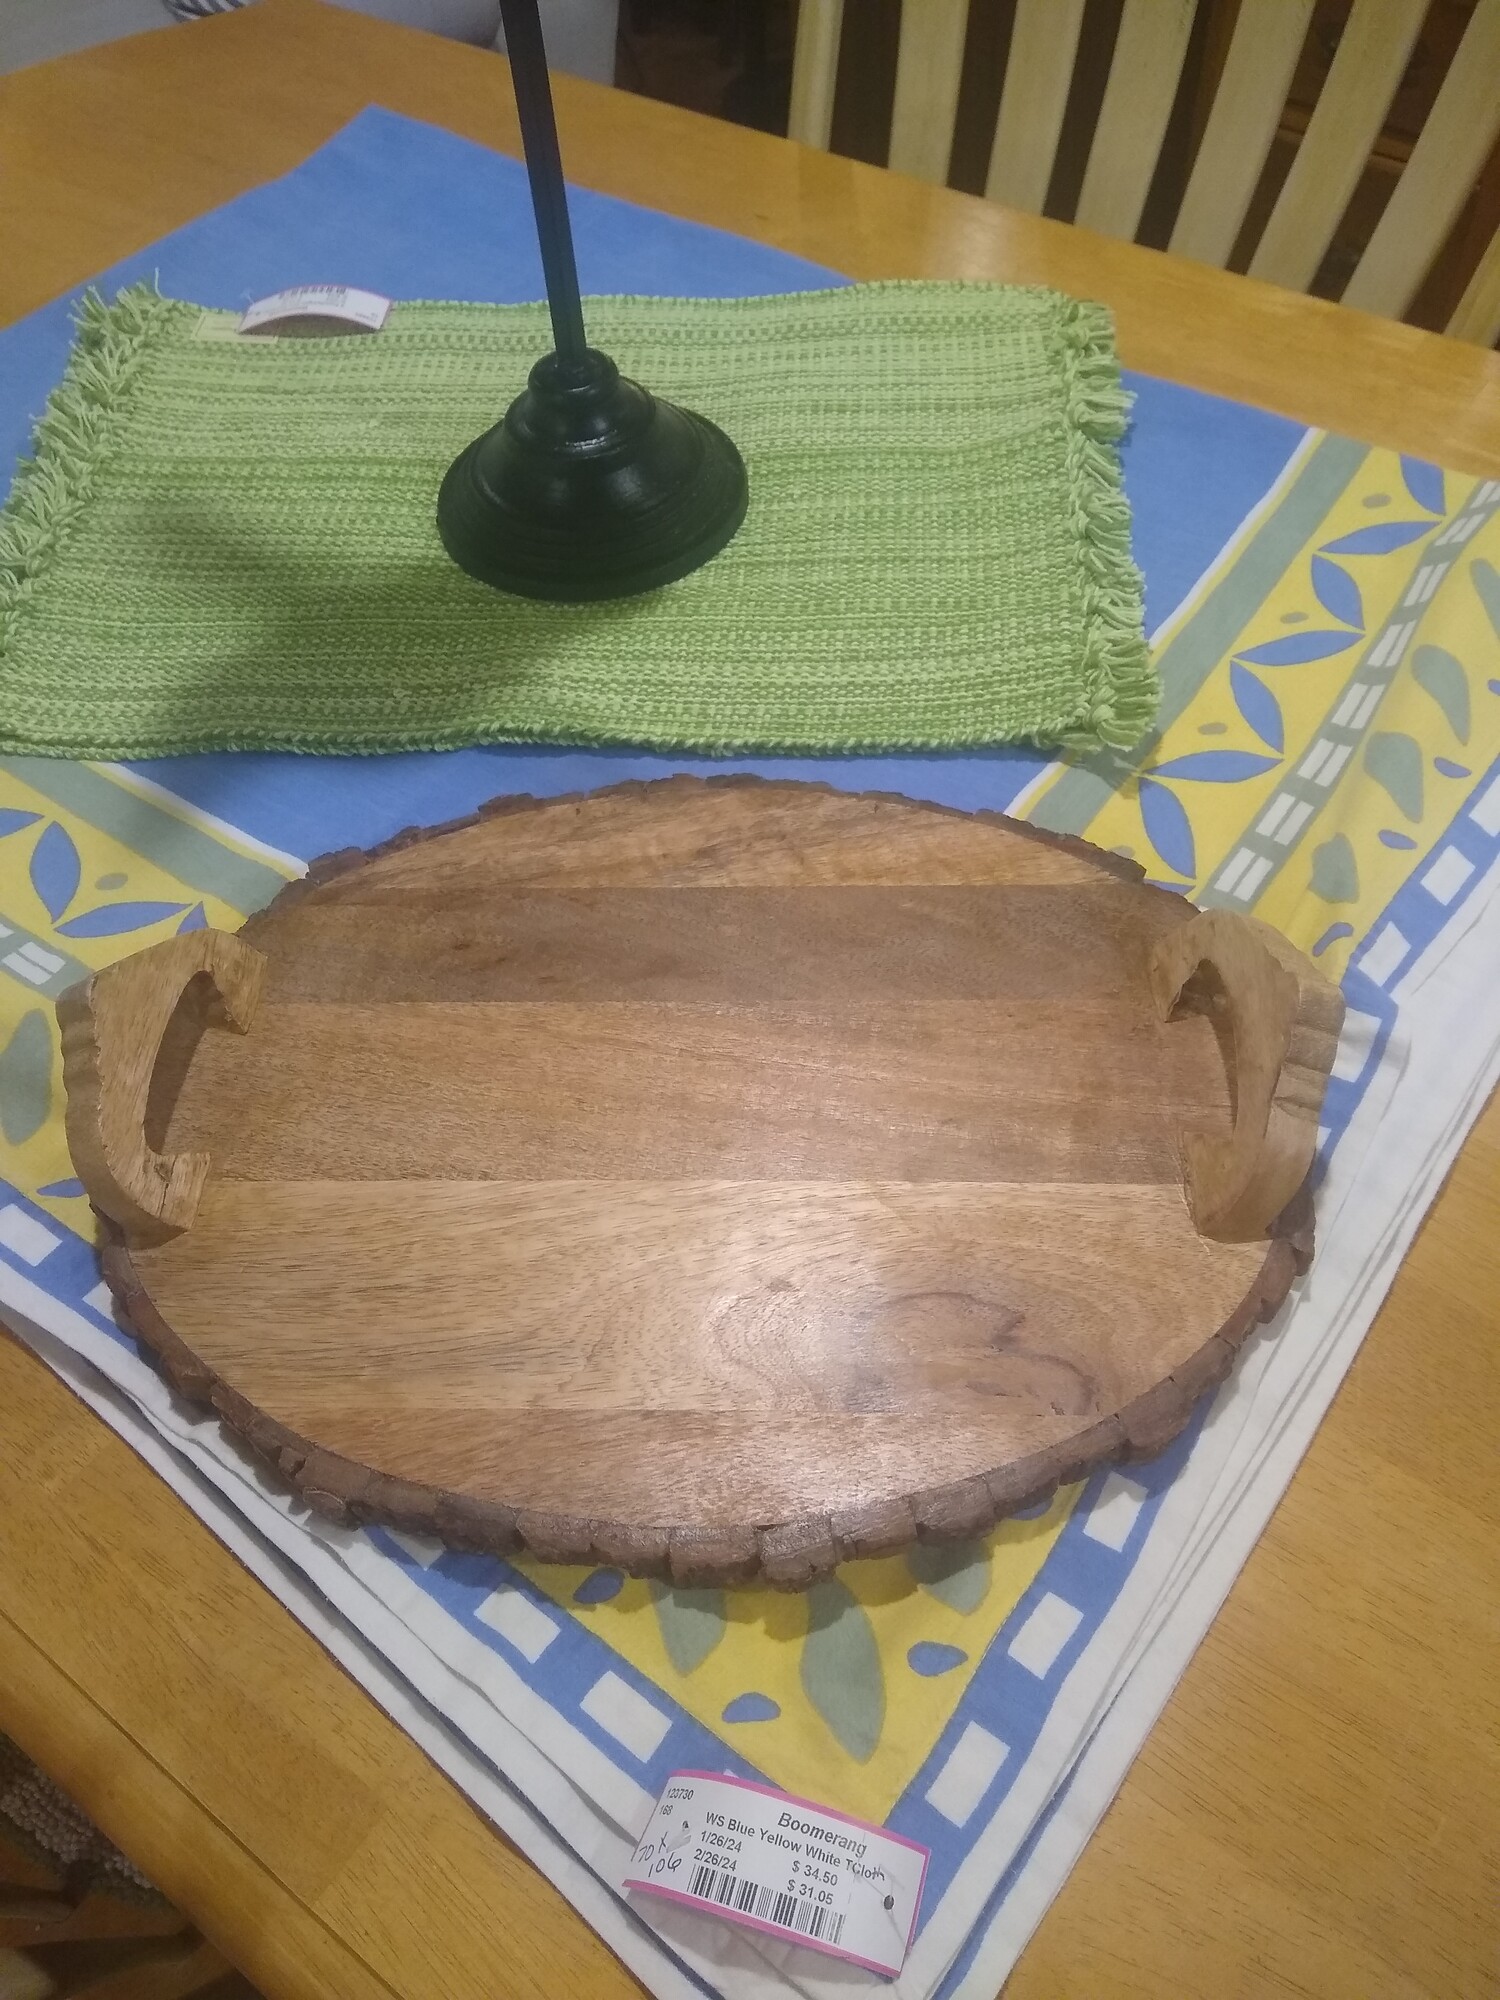 Wood Live Edge Oval Tray

Oval wooden tray with live edge and handles.

Size: 16 in wide X 12 in deep X 1 in high